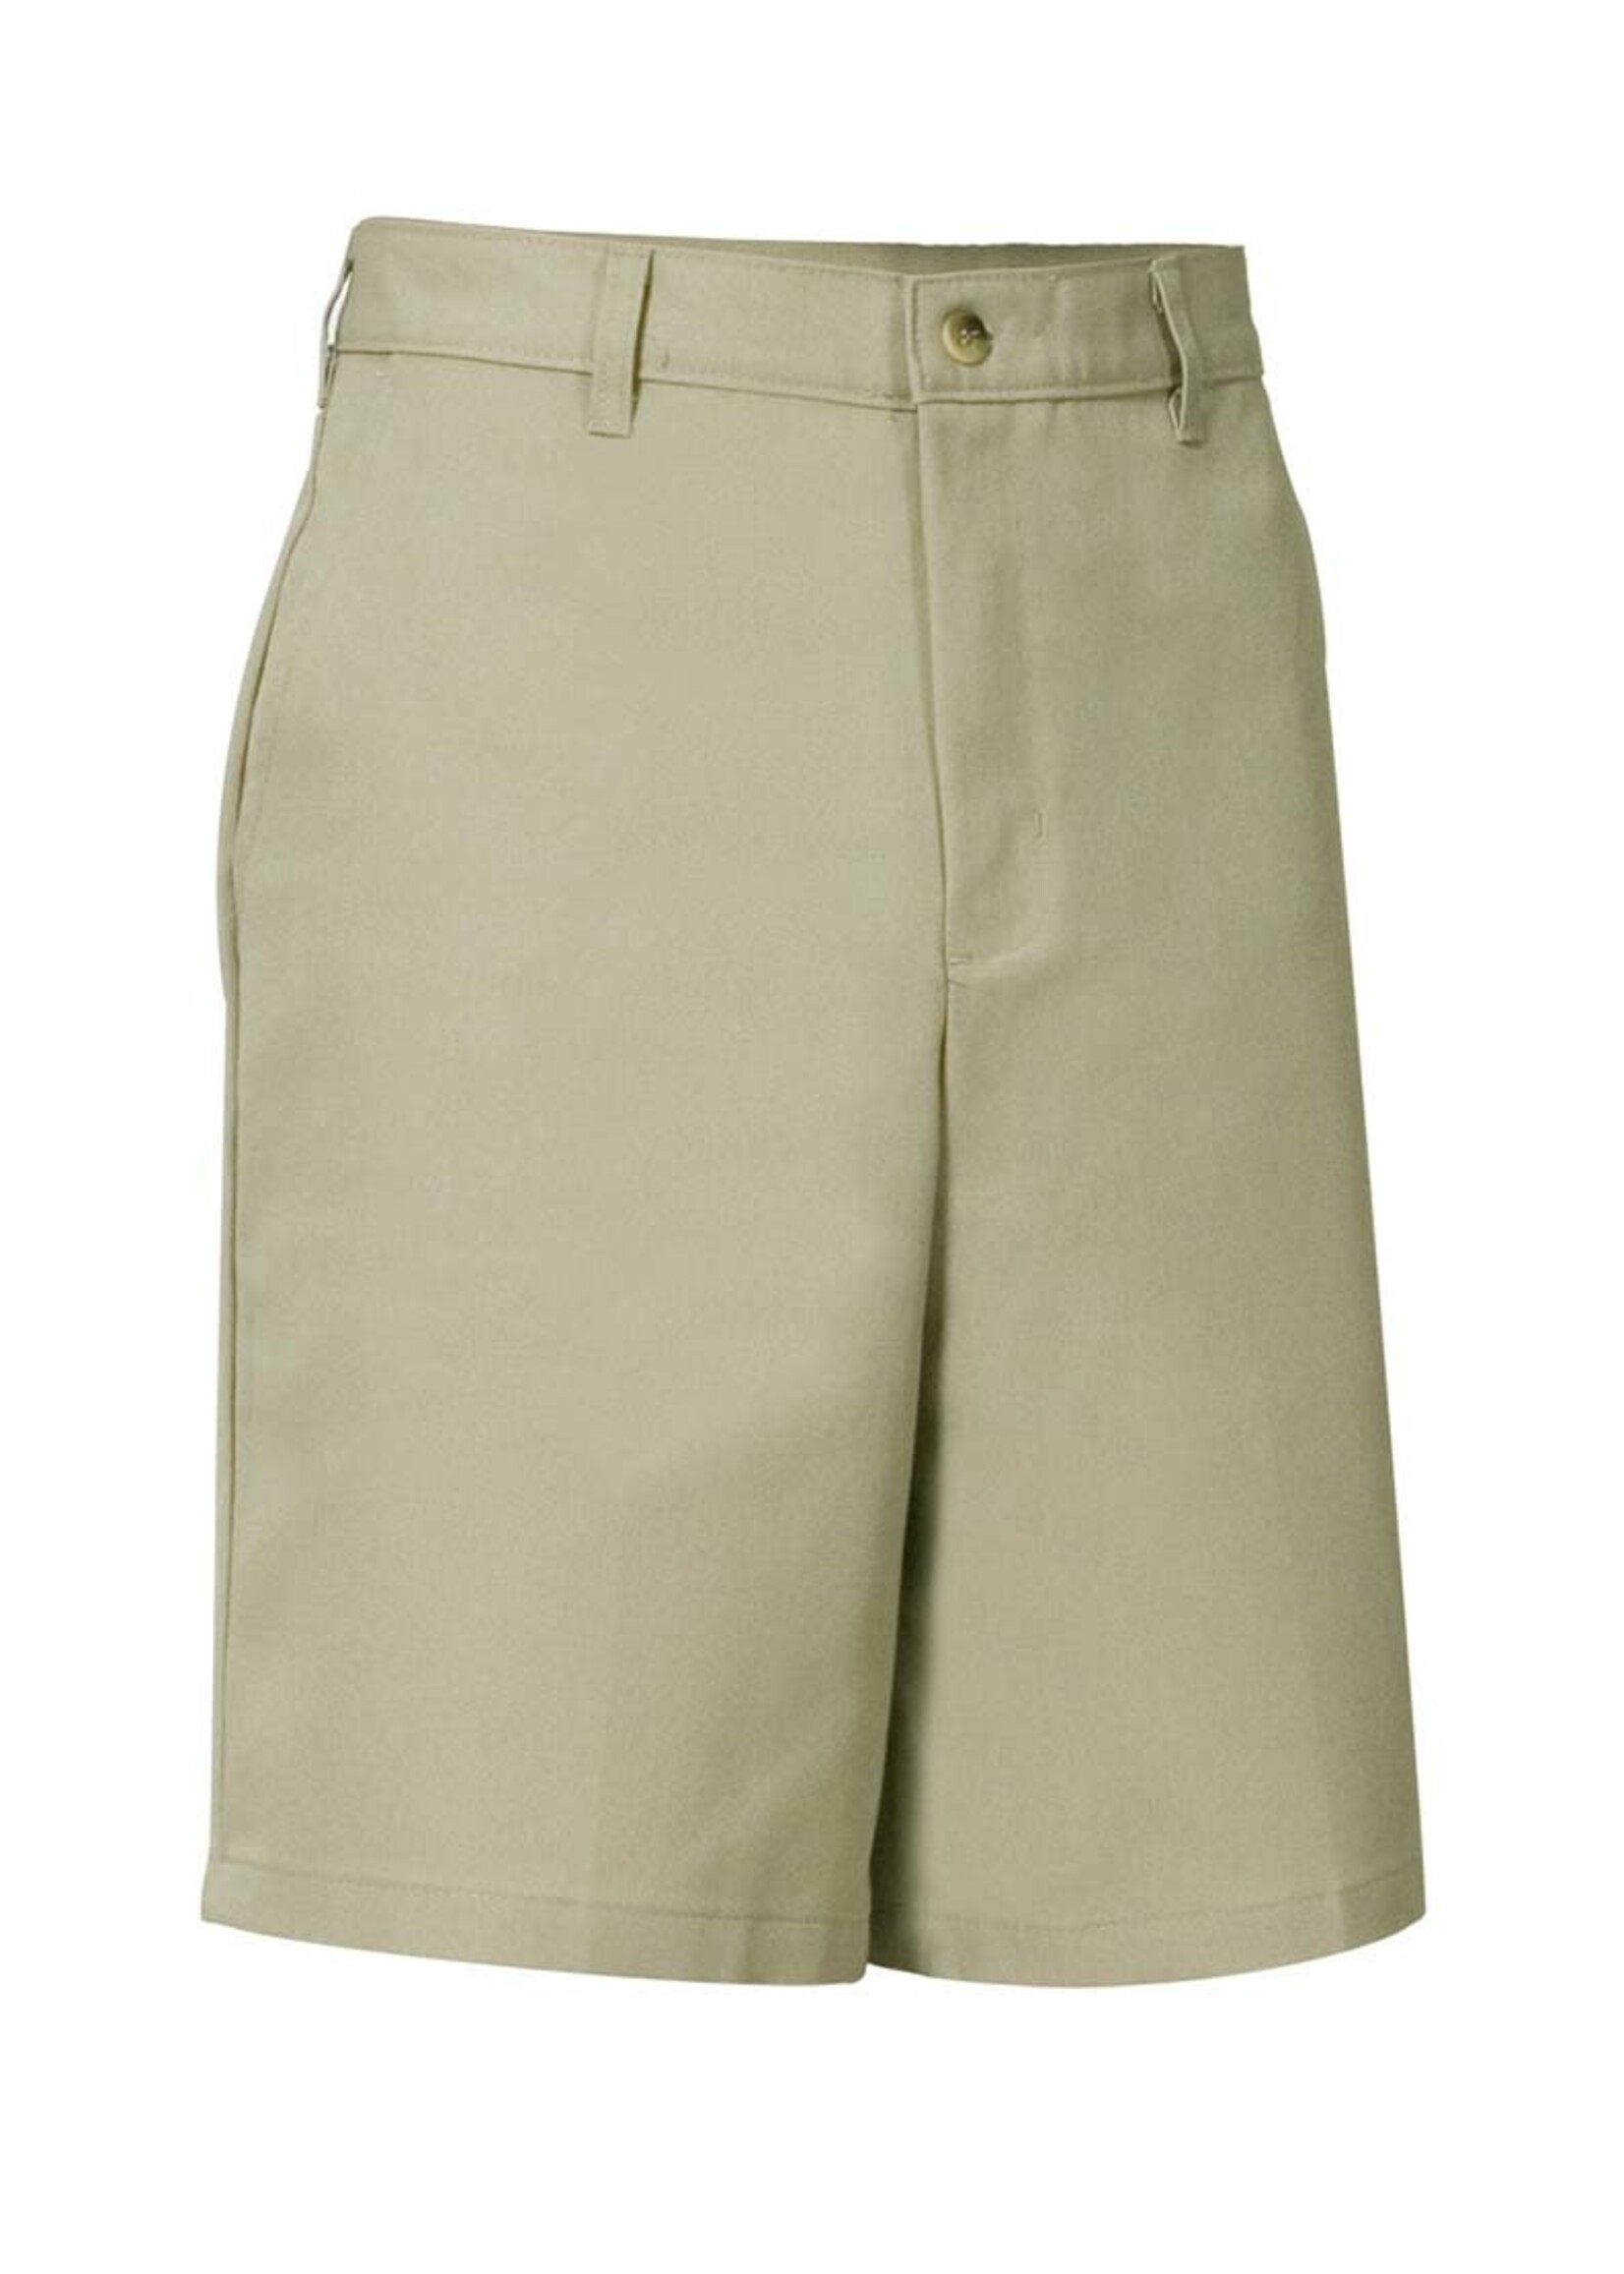 Mens Flat Front Shorts with logo (KN)